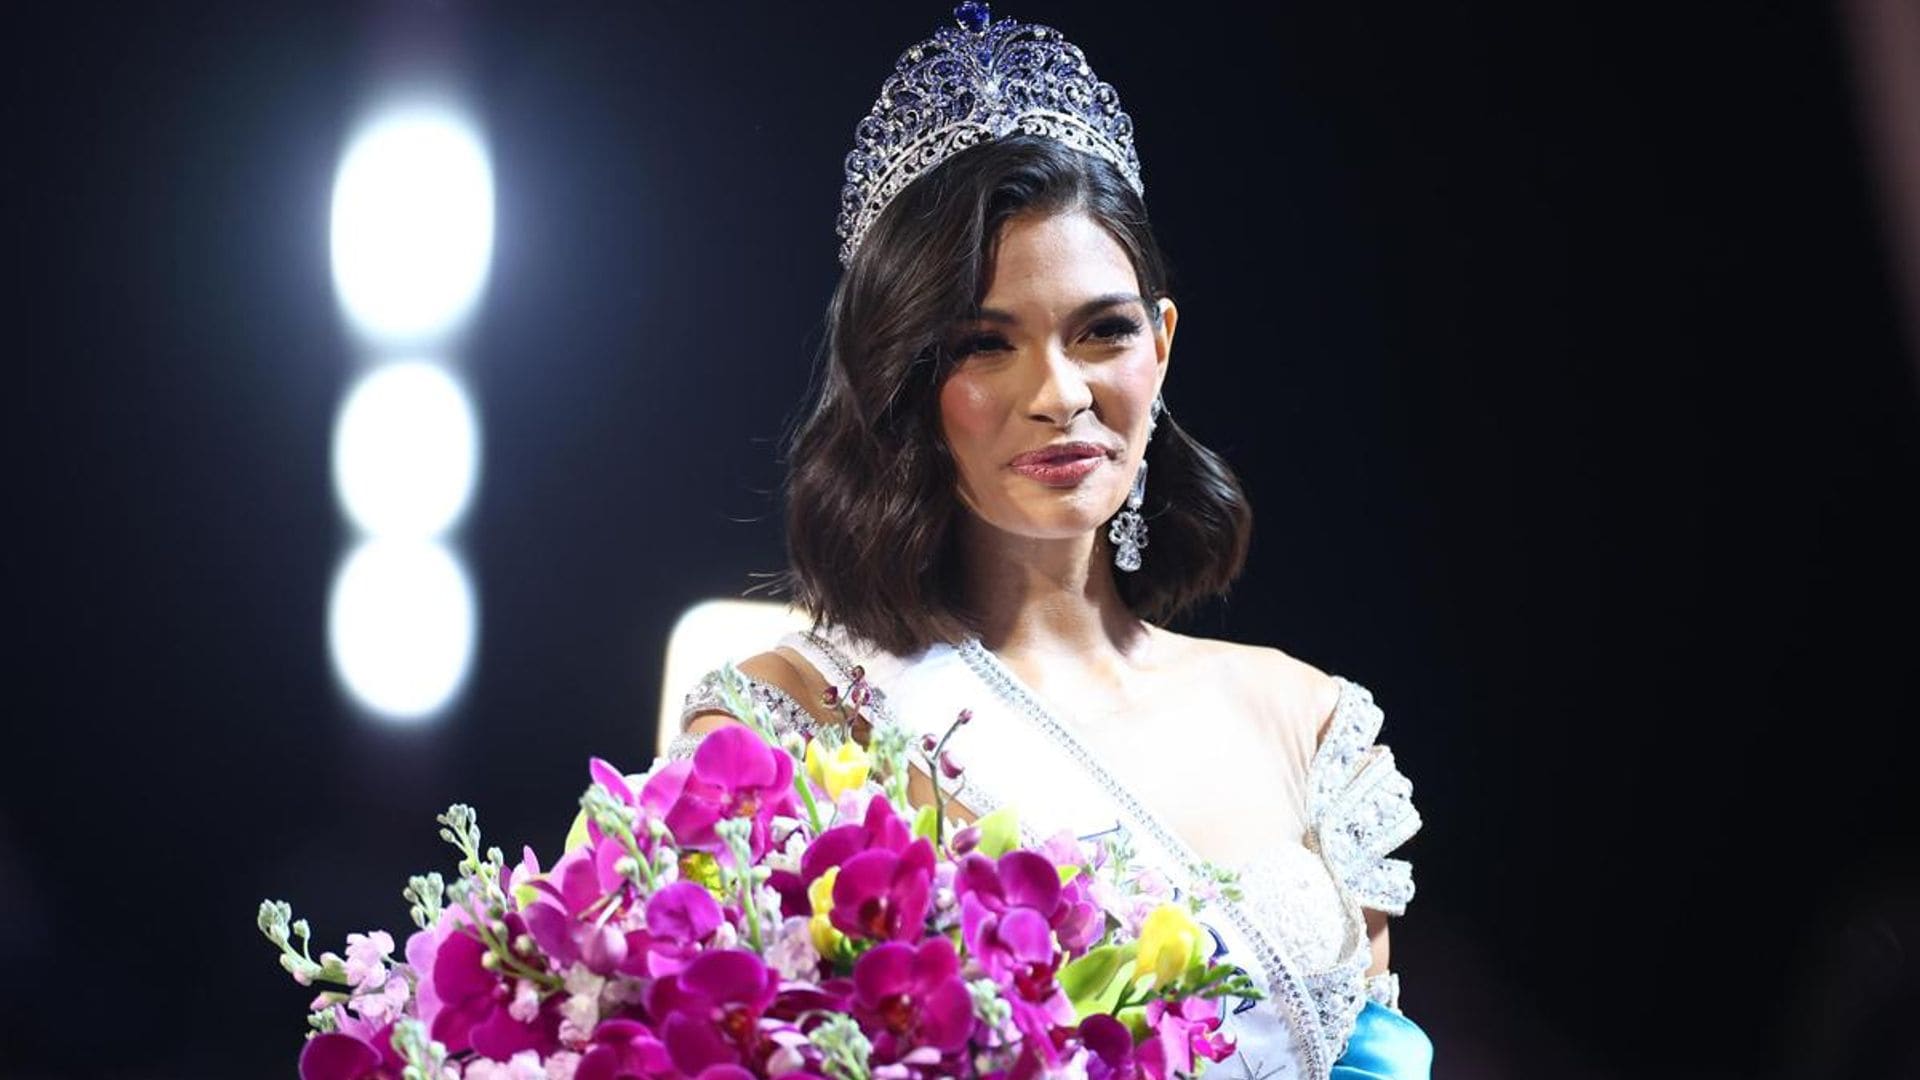 Miss Universe Sheynnis Palacios reveals she had a seizure and suffers from anxiety attacks